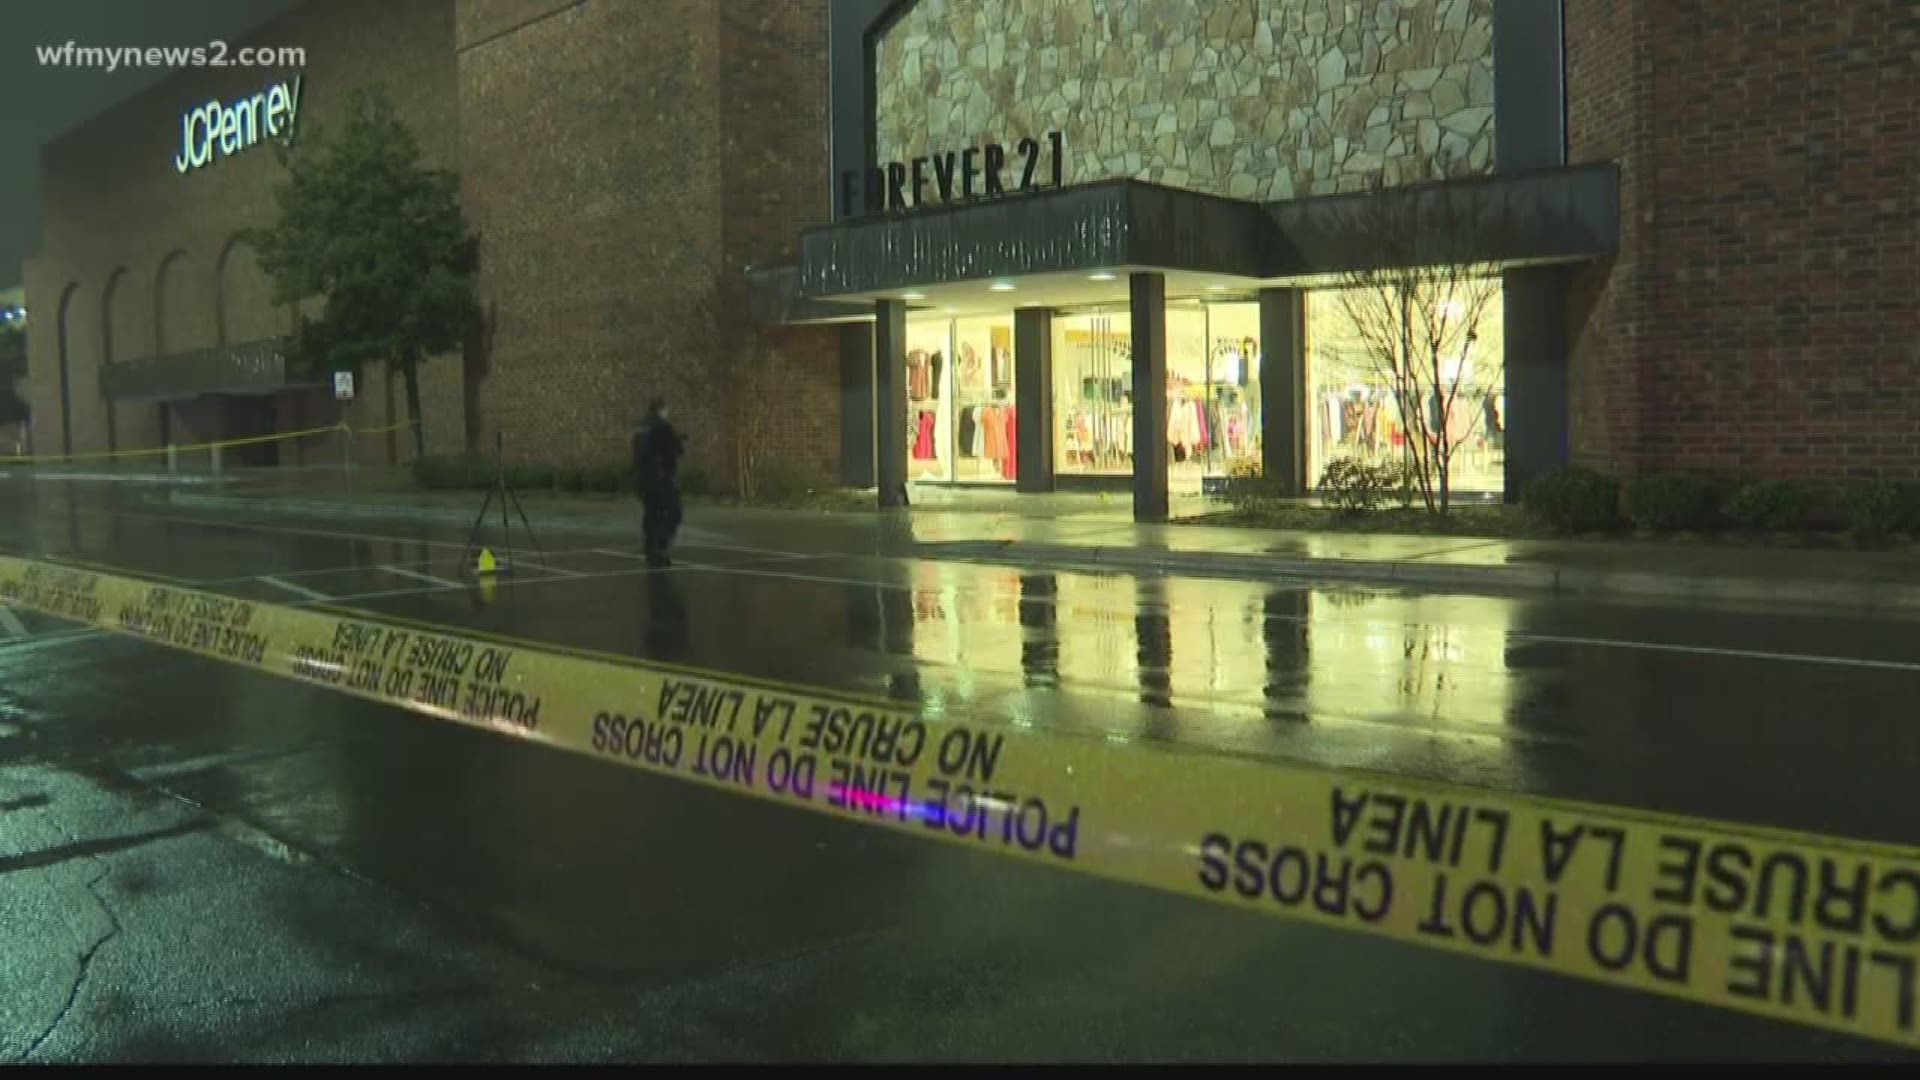 1 teen was shot, and 1 suspect is in custody after a night at the mall ended with a shooting